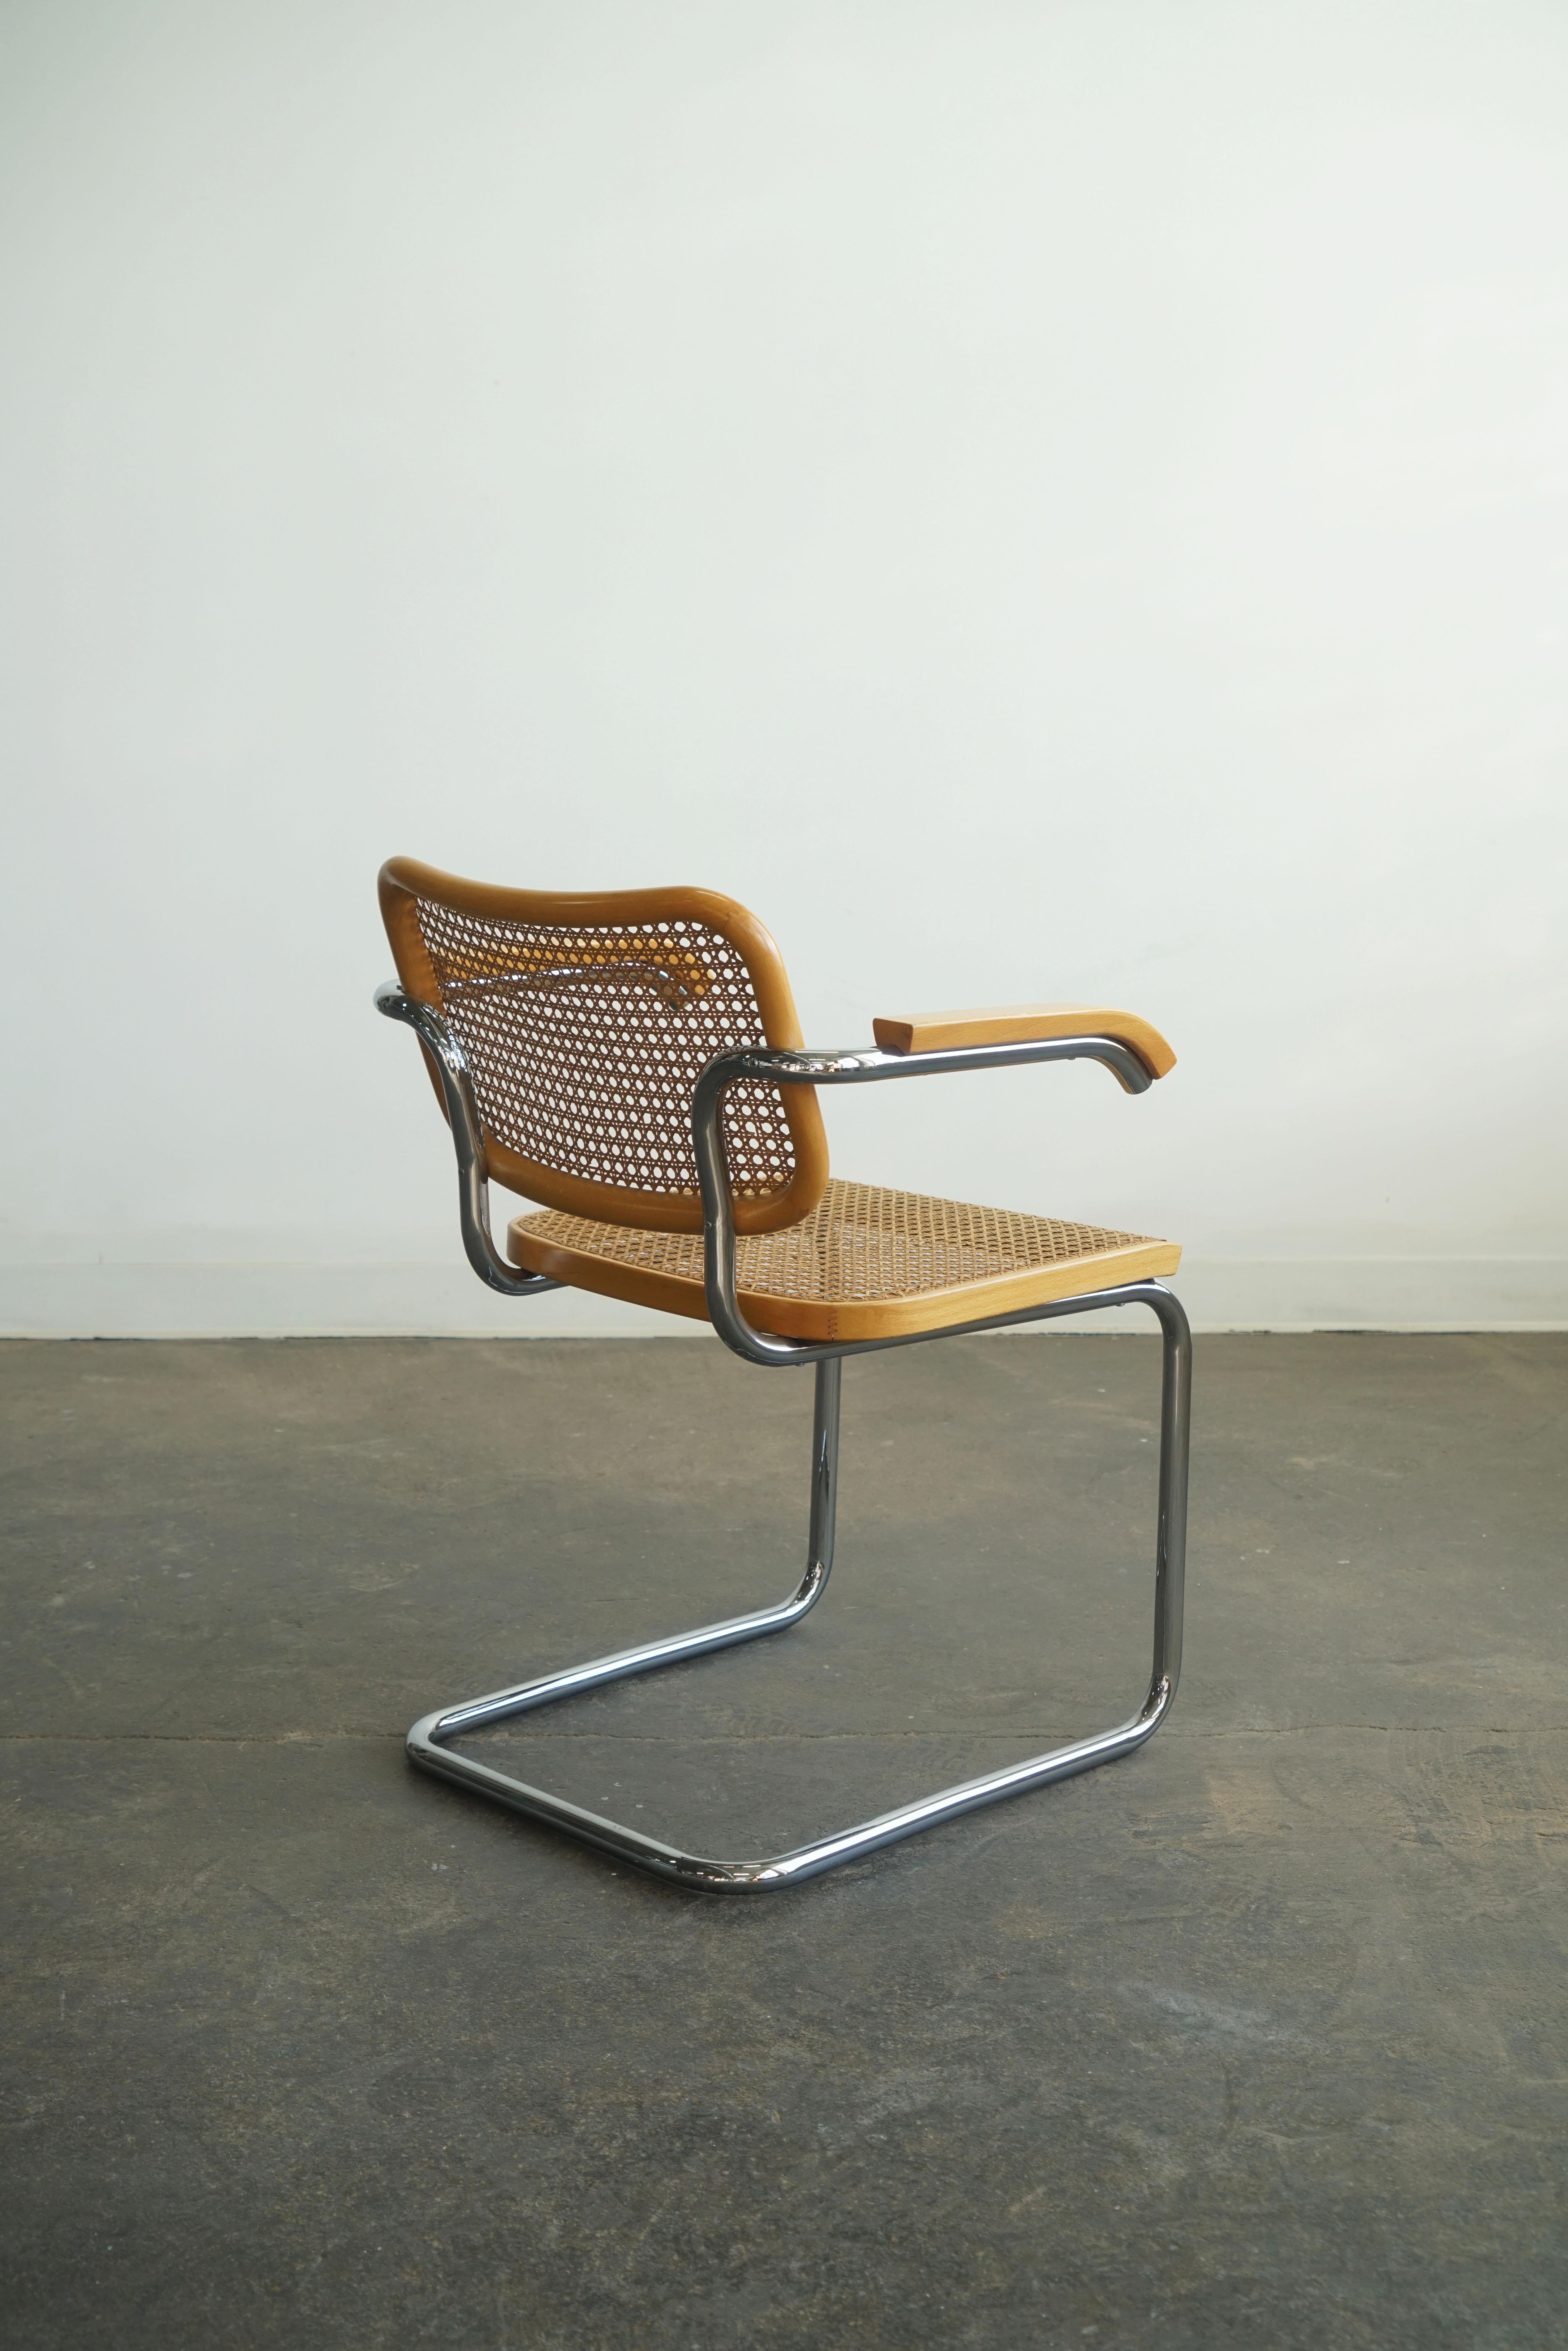 Set of 4 1960's Marcel Breuer Cesca chairs with arms, Stendig labels For Sale 5